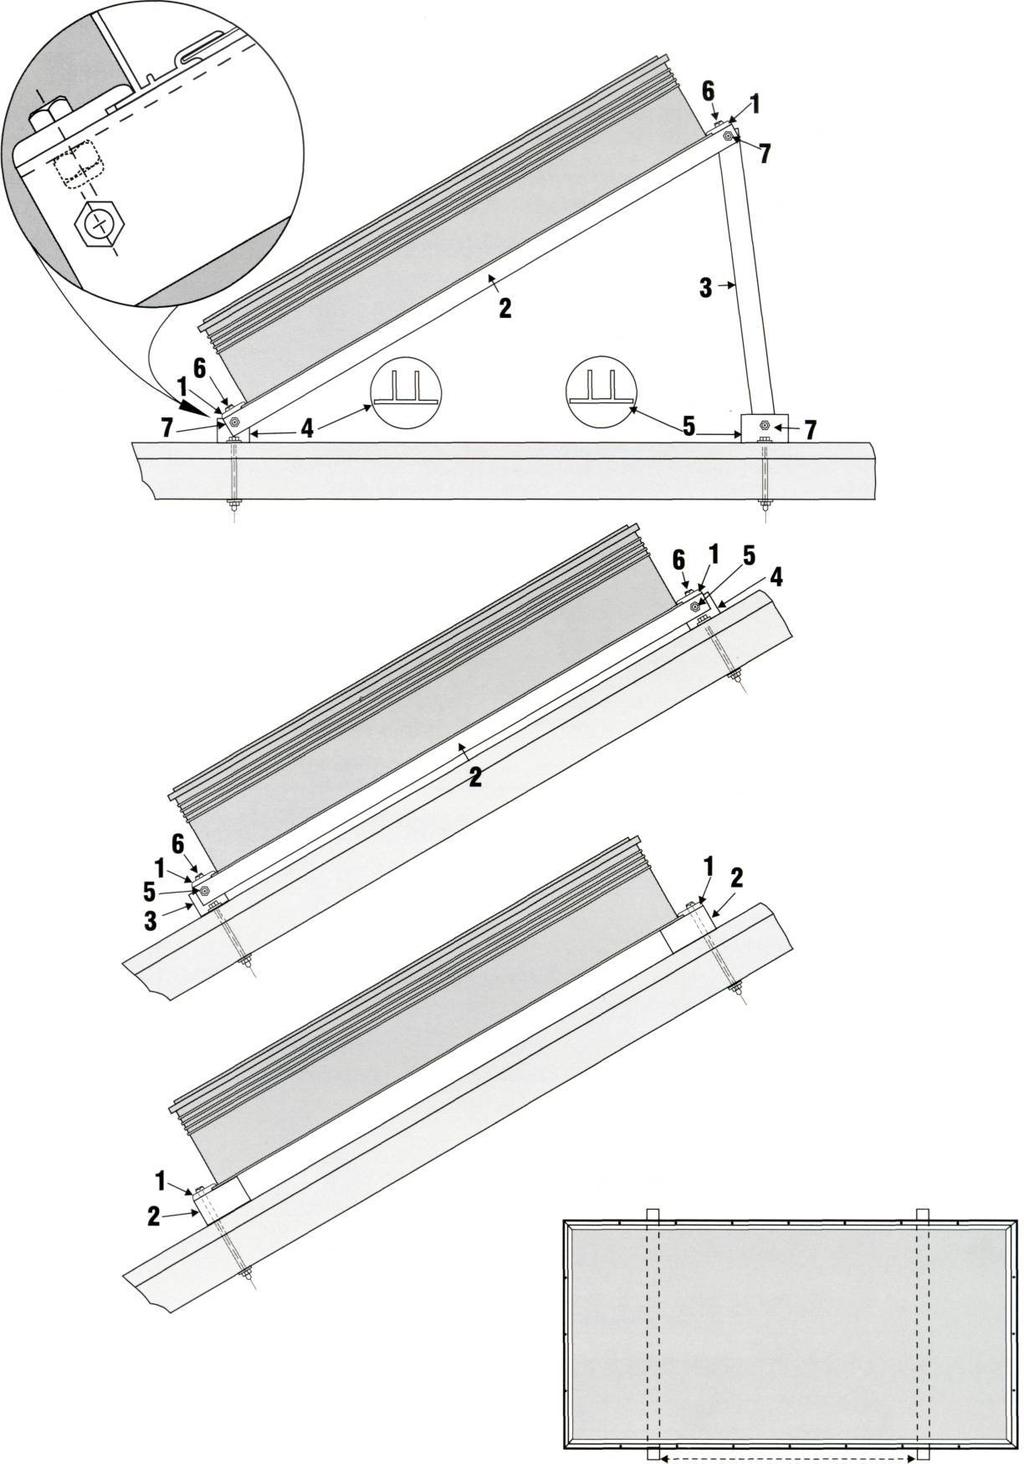 PROGRESSIVTUBE MOUNTING SYSTEM 1. Adjustable Tilt Mounting Hardware Parts: 1. Surface Clamps (4) 2. Cross Channel (2) 3. Standoff, 1-1/4" square tube, 1 /8: wall (2) 4.